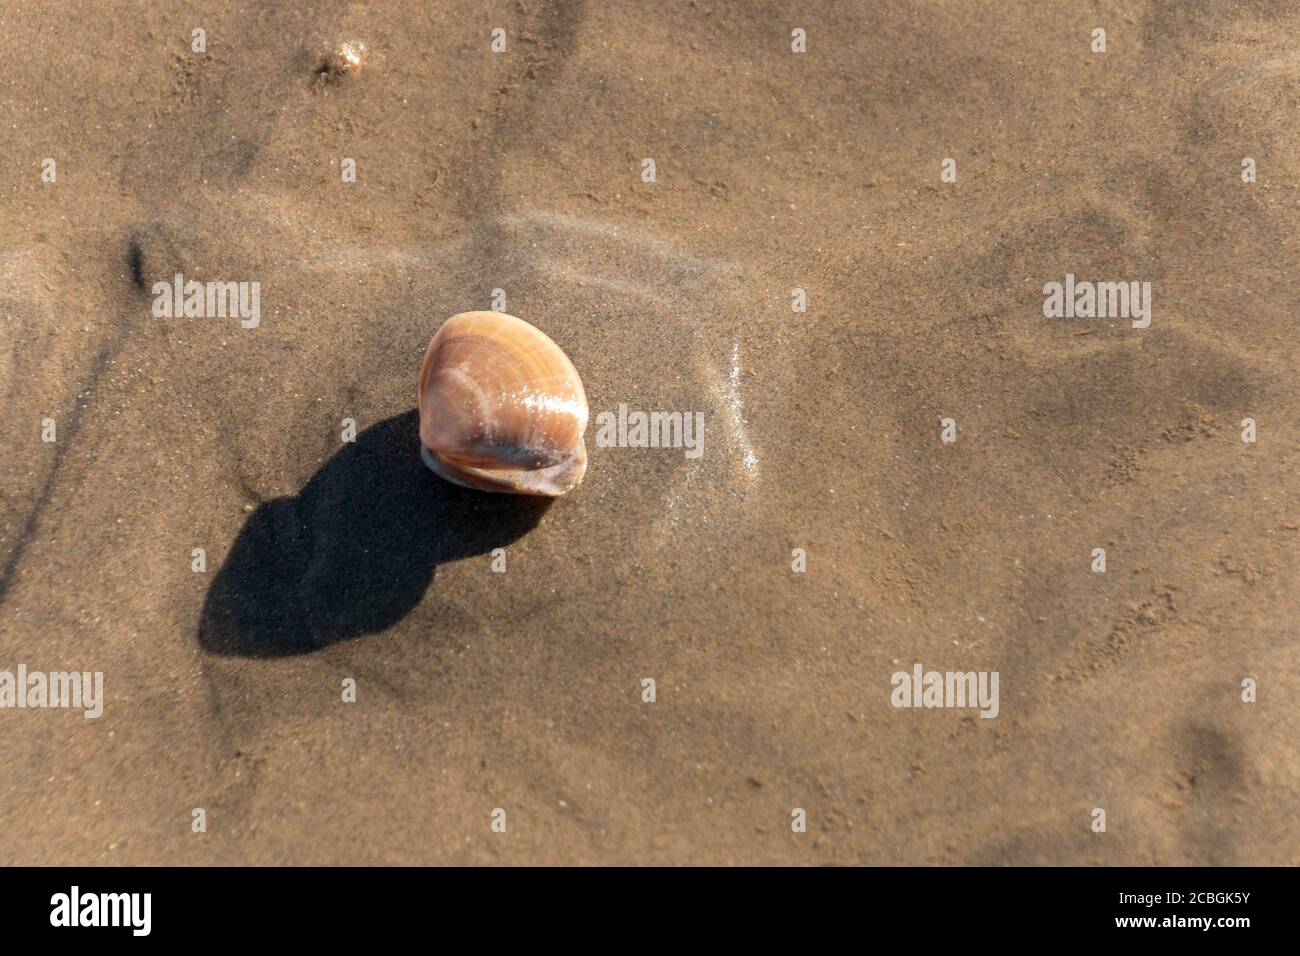 a close up view of a open clam shell left on the wet sand at low tide Stock Photo